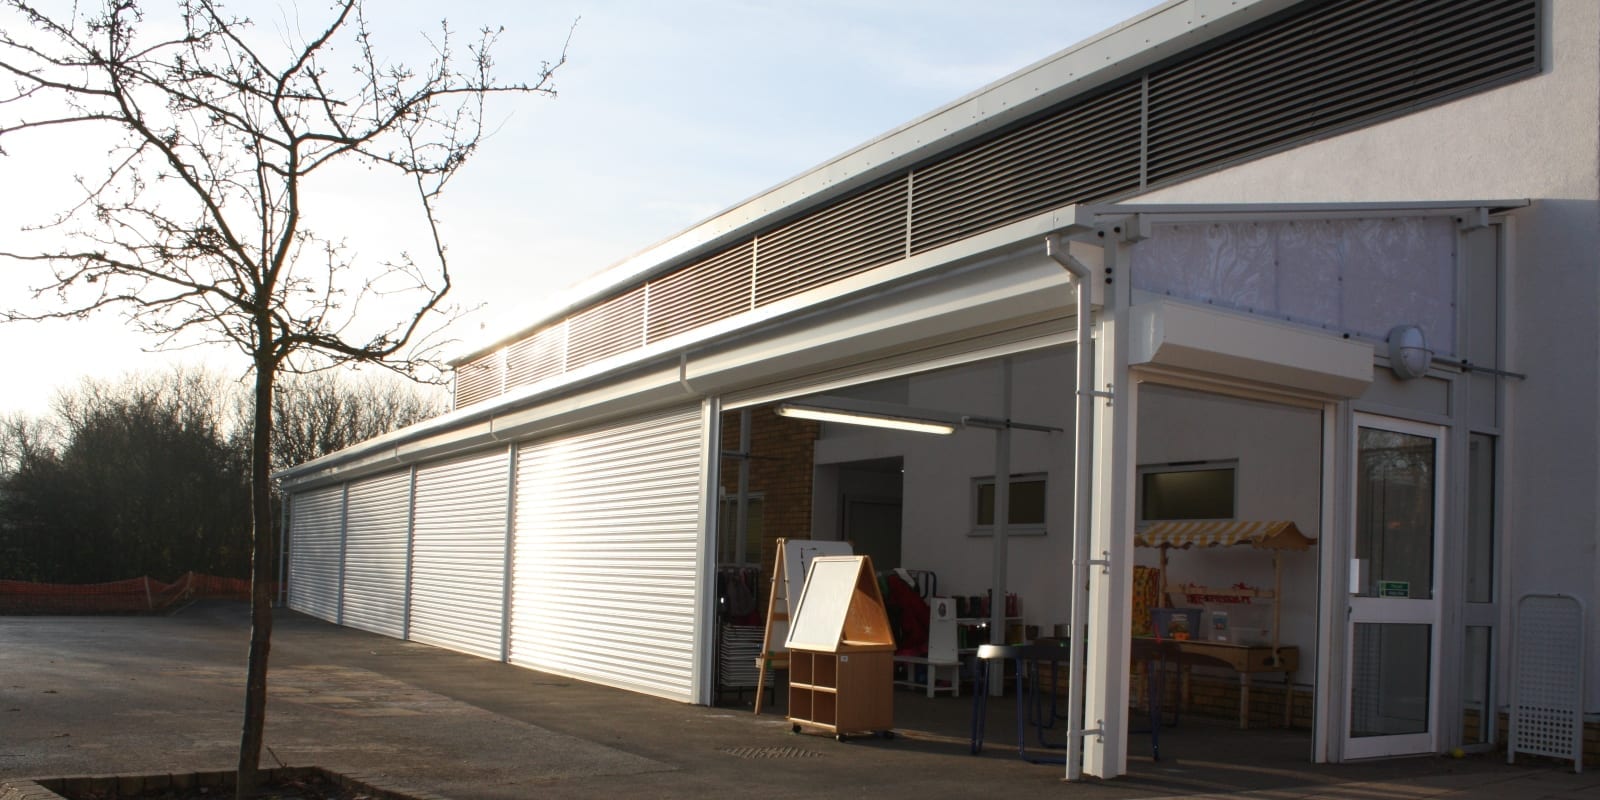 Enclosed canopy with roller shutters made for Laughton Manor School